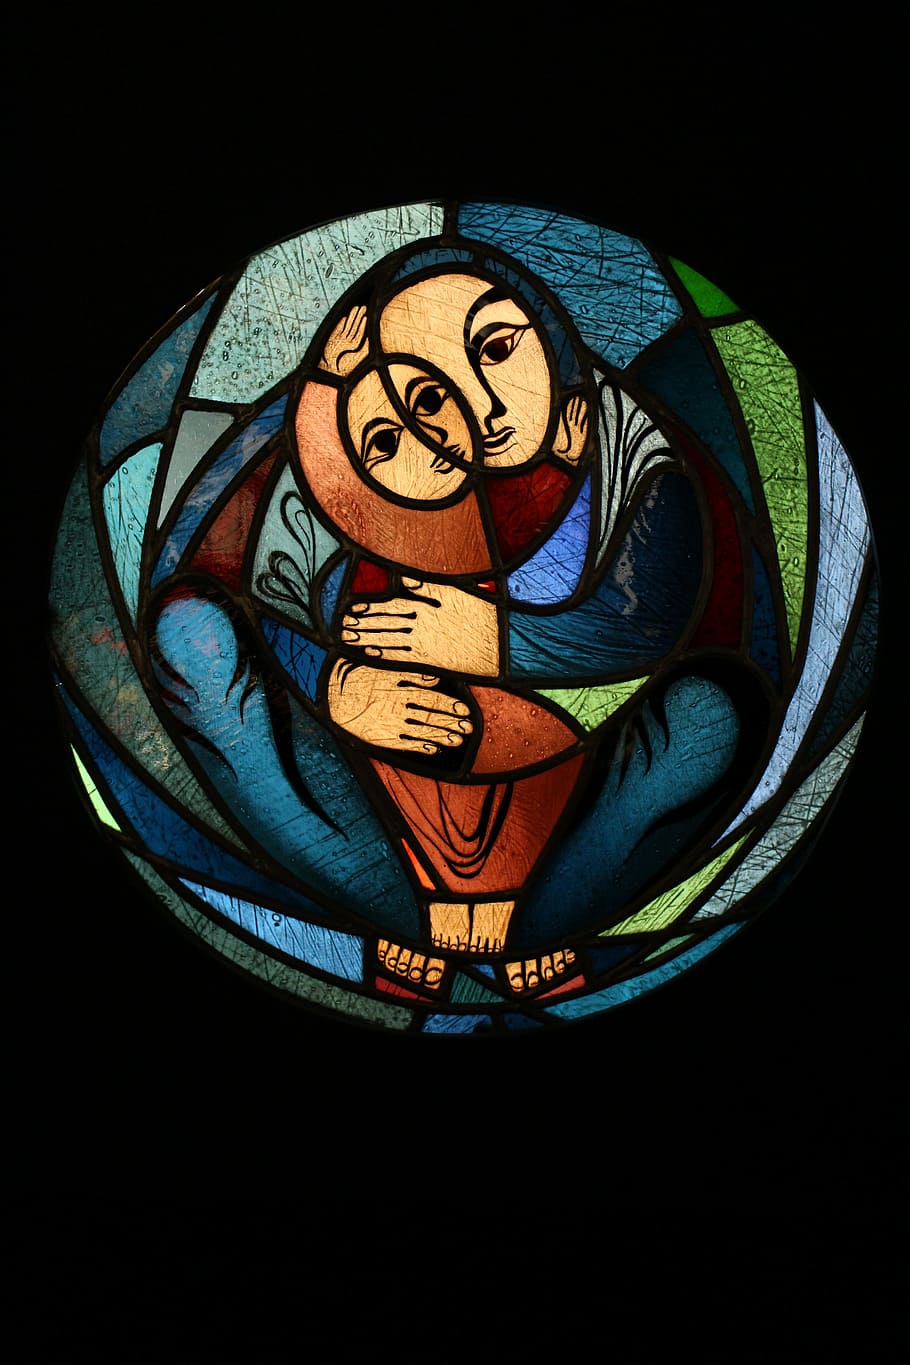 woman, hugging, toddler painting, glass window, kevin schneider-lang, mother with child, church, church window, glasmalereie, child